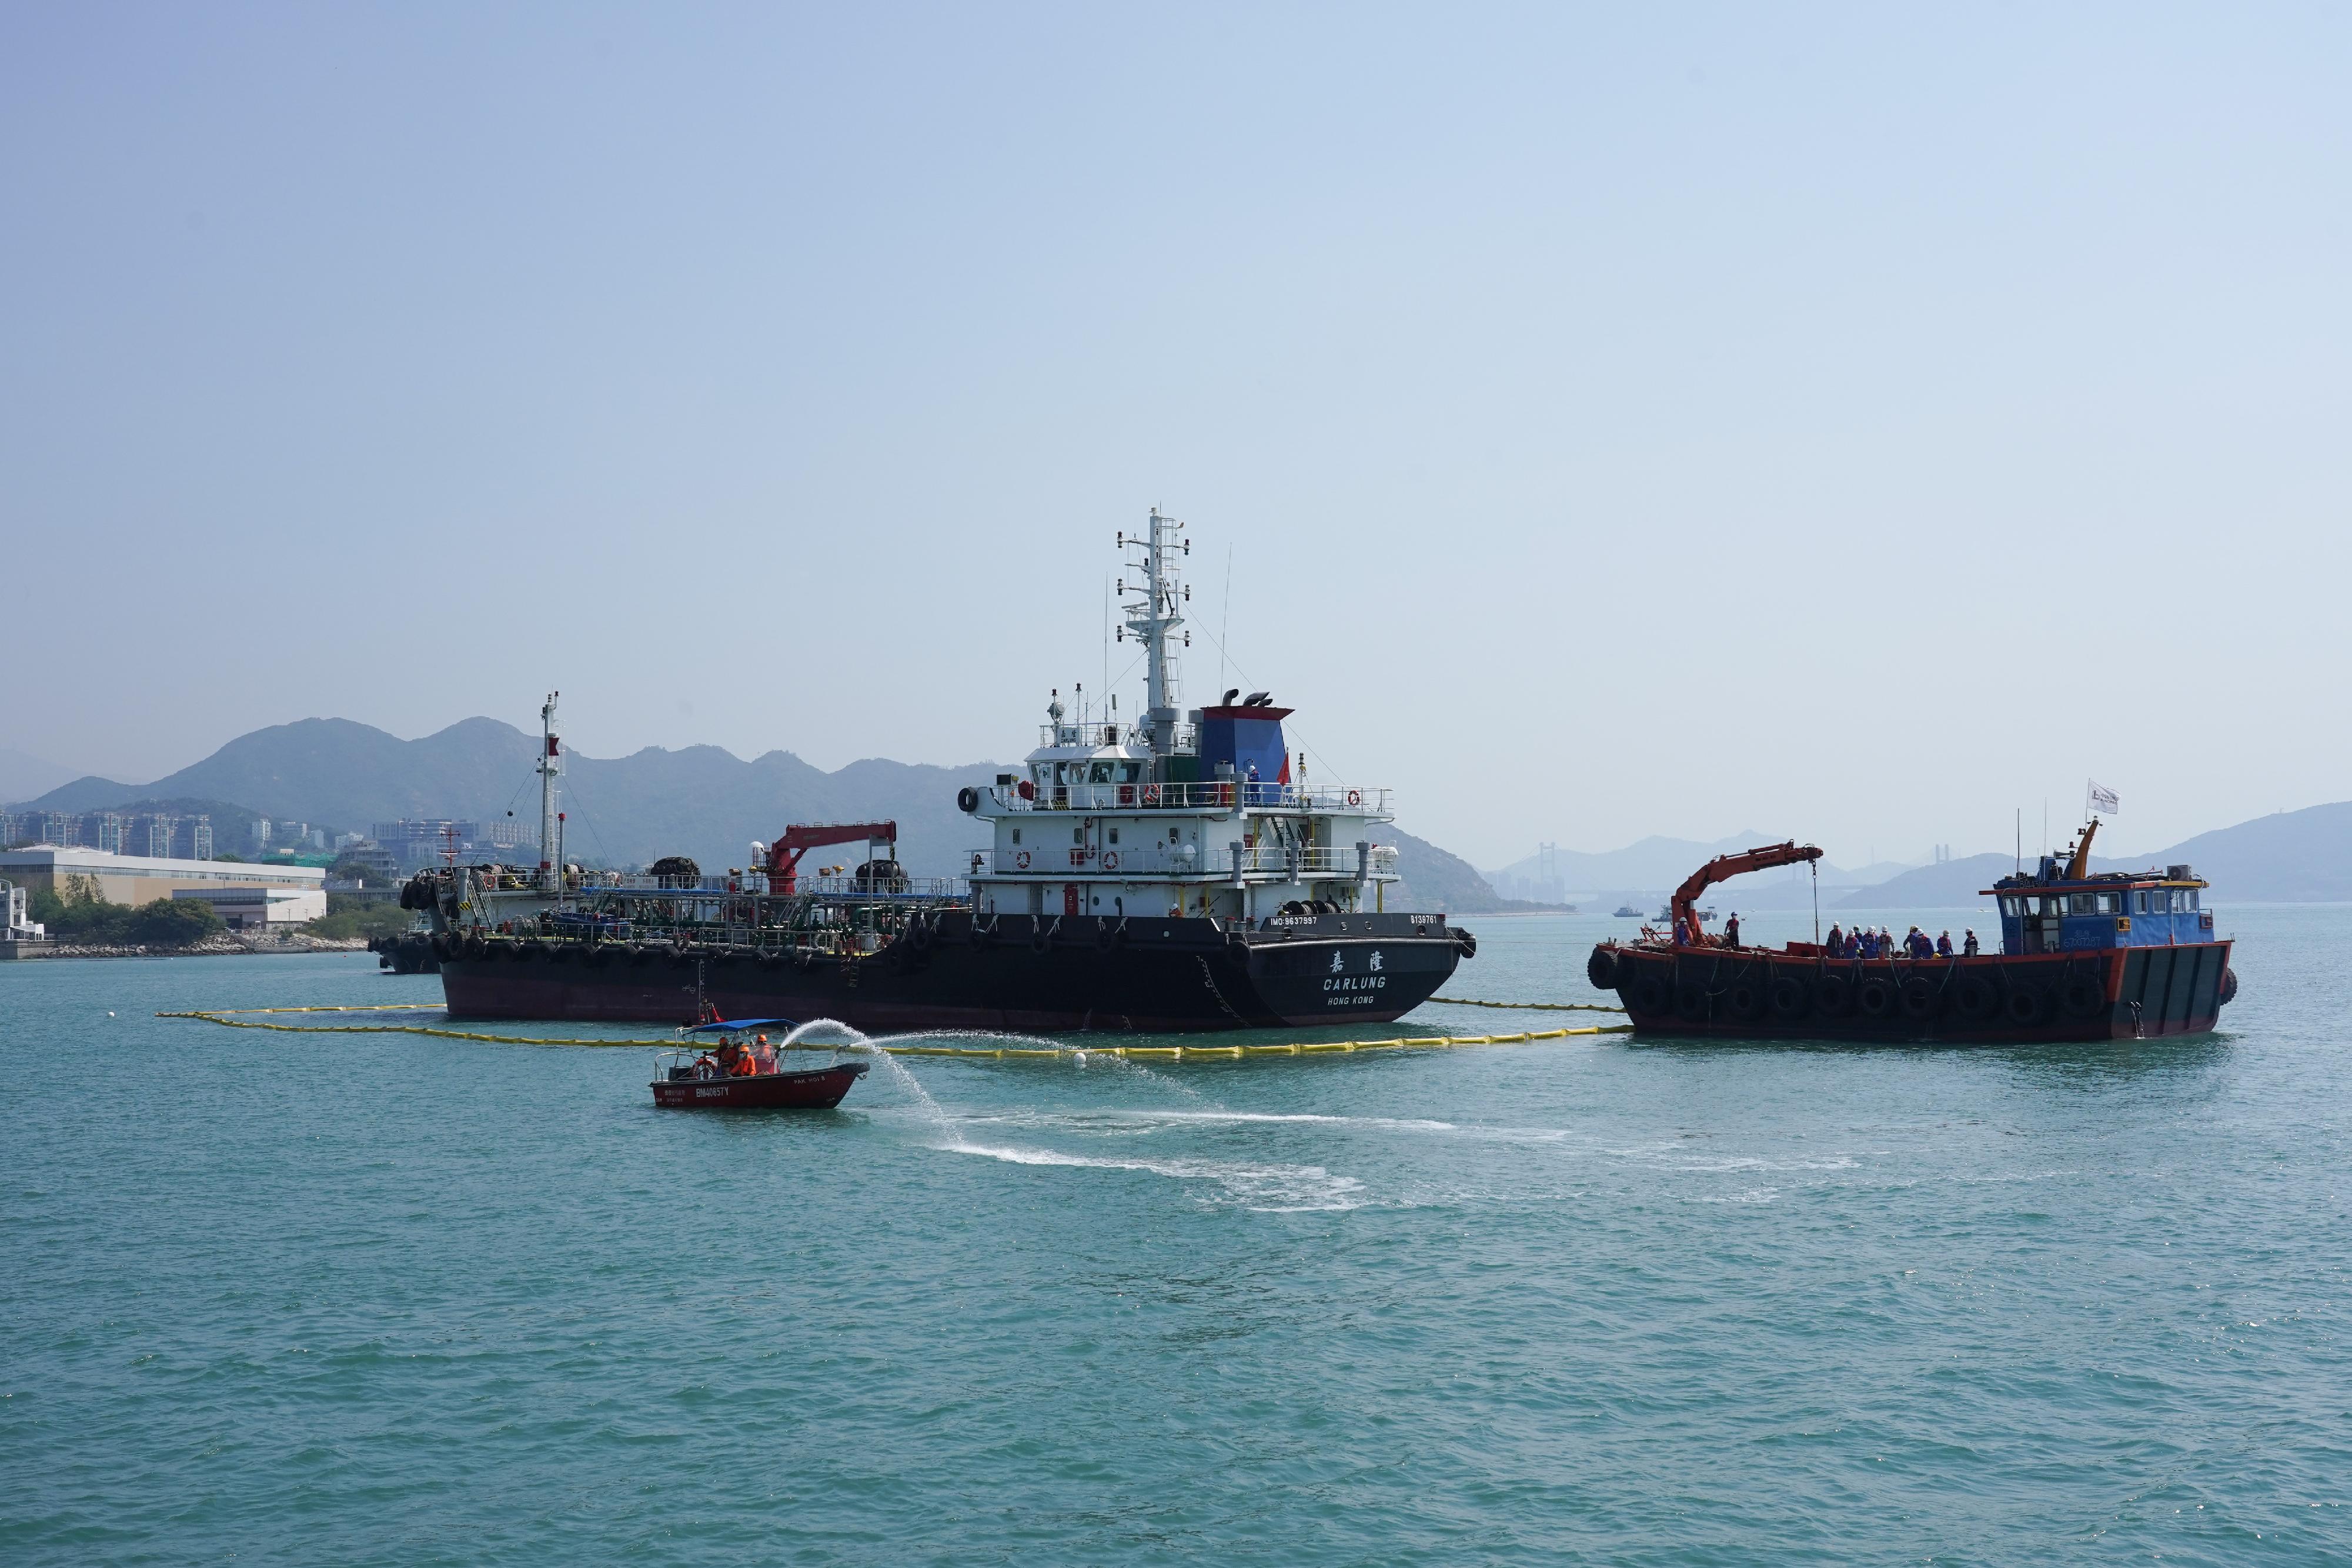 The annual marine pollution joint response exercises, code-named Oilex 2022 and Maritime Hazardous and Noxious Substances (HNS) 2022, were conducted by various government departments this morning (October 28) off Pearl Island, Tuen Mun, to test their marine pollution responses in the event of spillage of oil and HNS in Hong Kong waters. Photo shows a pollution control vessel simulating the spraying of oil dispersant with water.